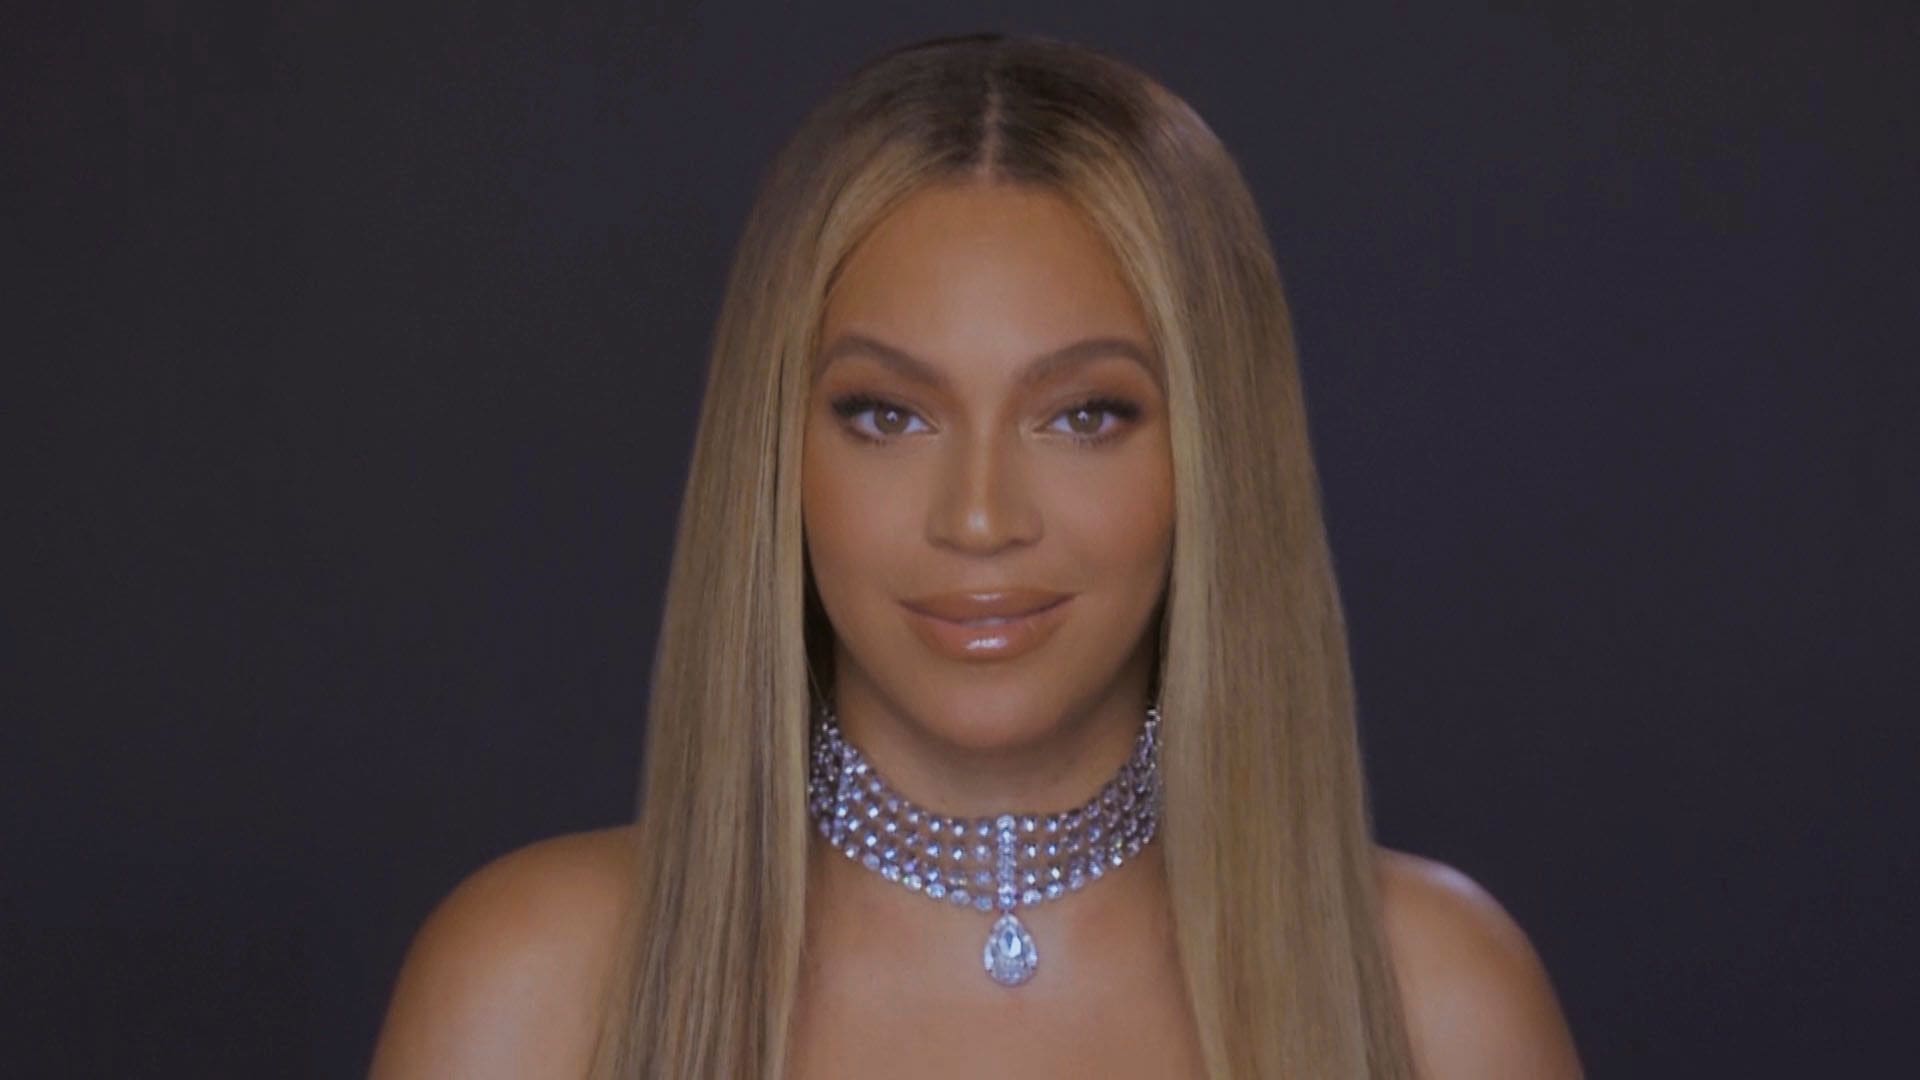 new-album-act-i-renaissance-7-29-by-beyonce-coming-up-in-july-this-summer